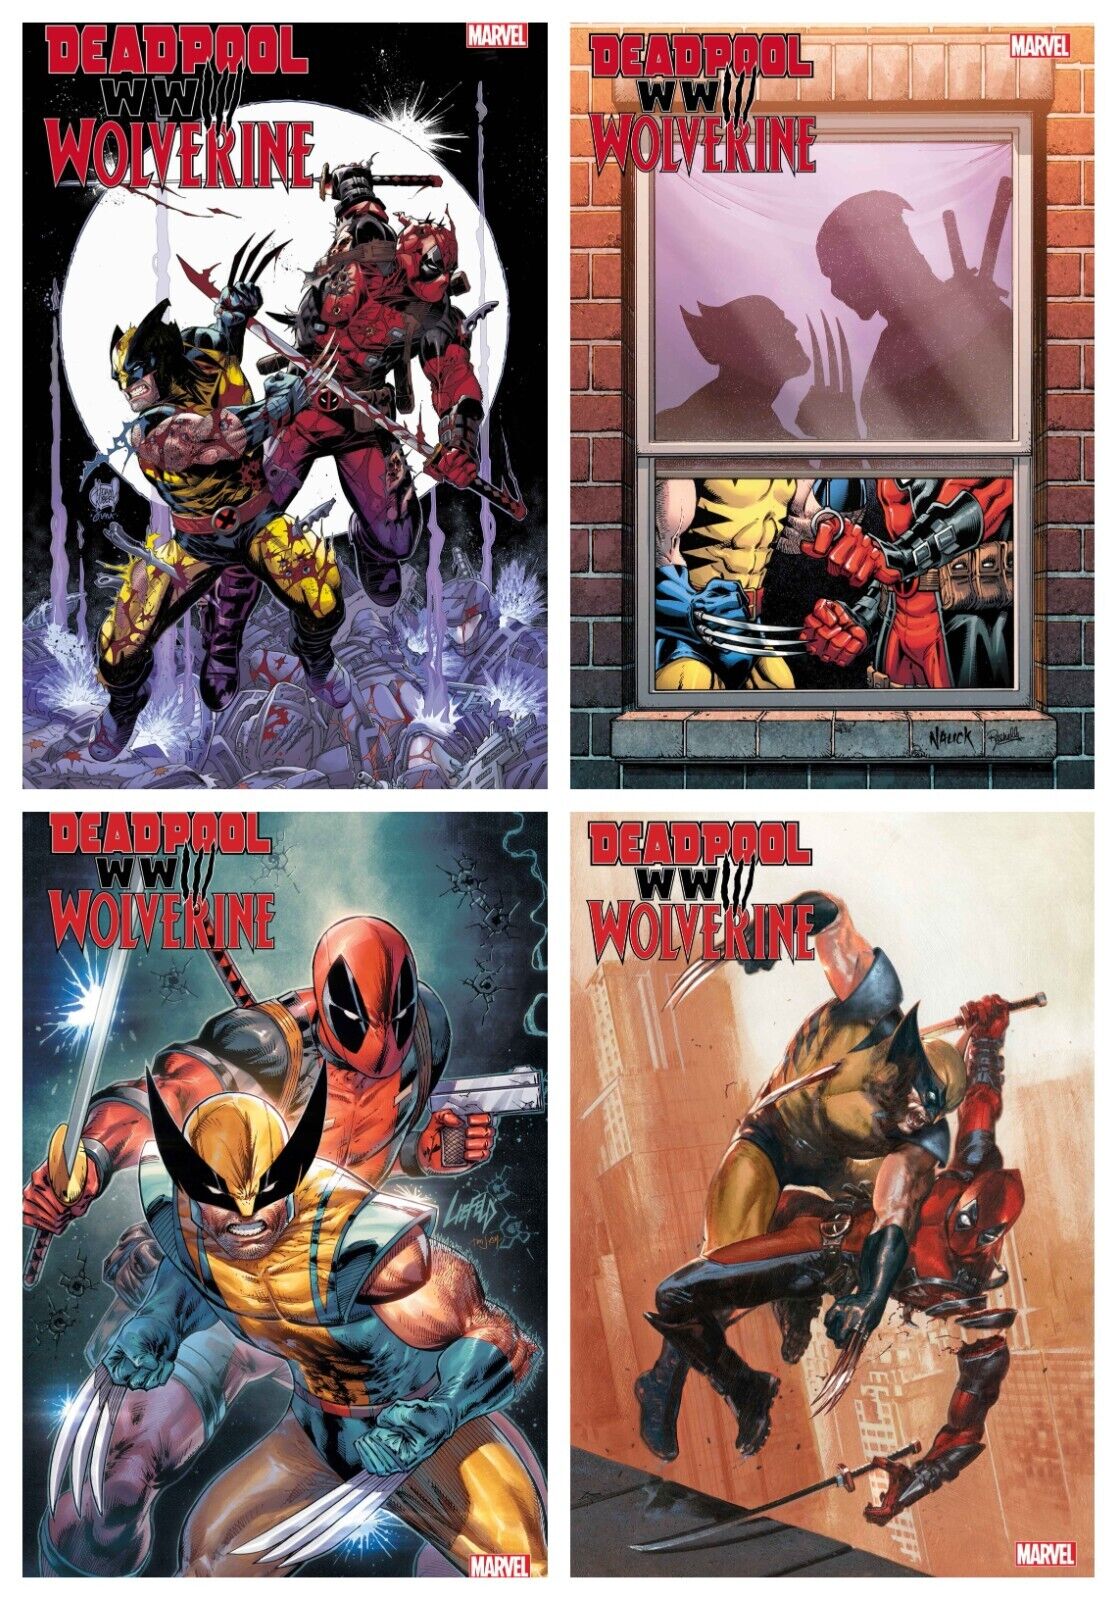 Deadpool Wolverine WWIII #1 4 COVER SET SHIPS 5/1 LIEFELD RAW 